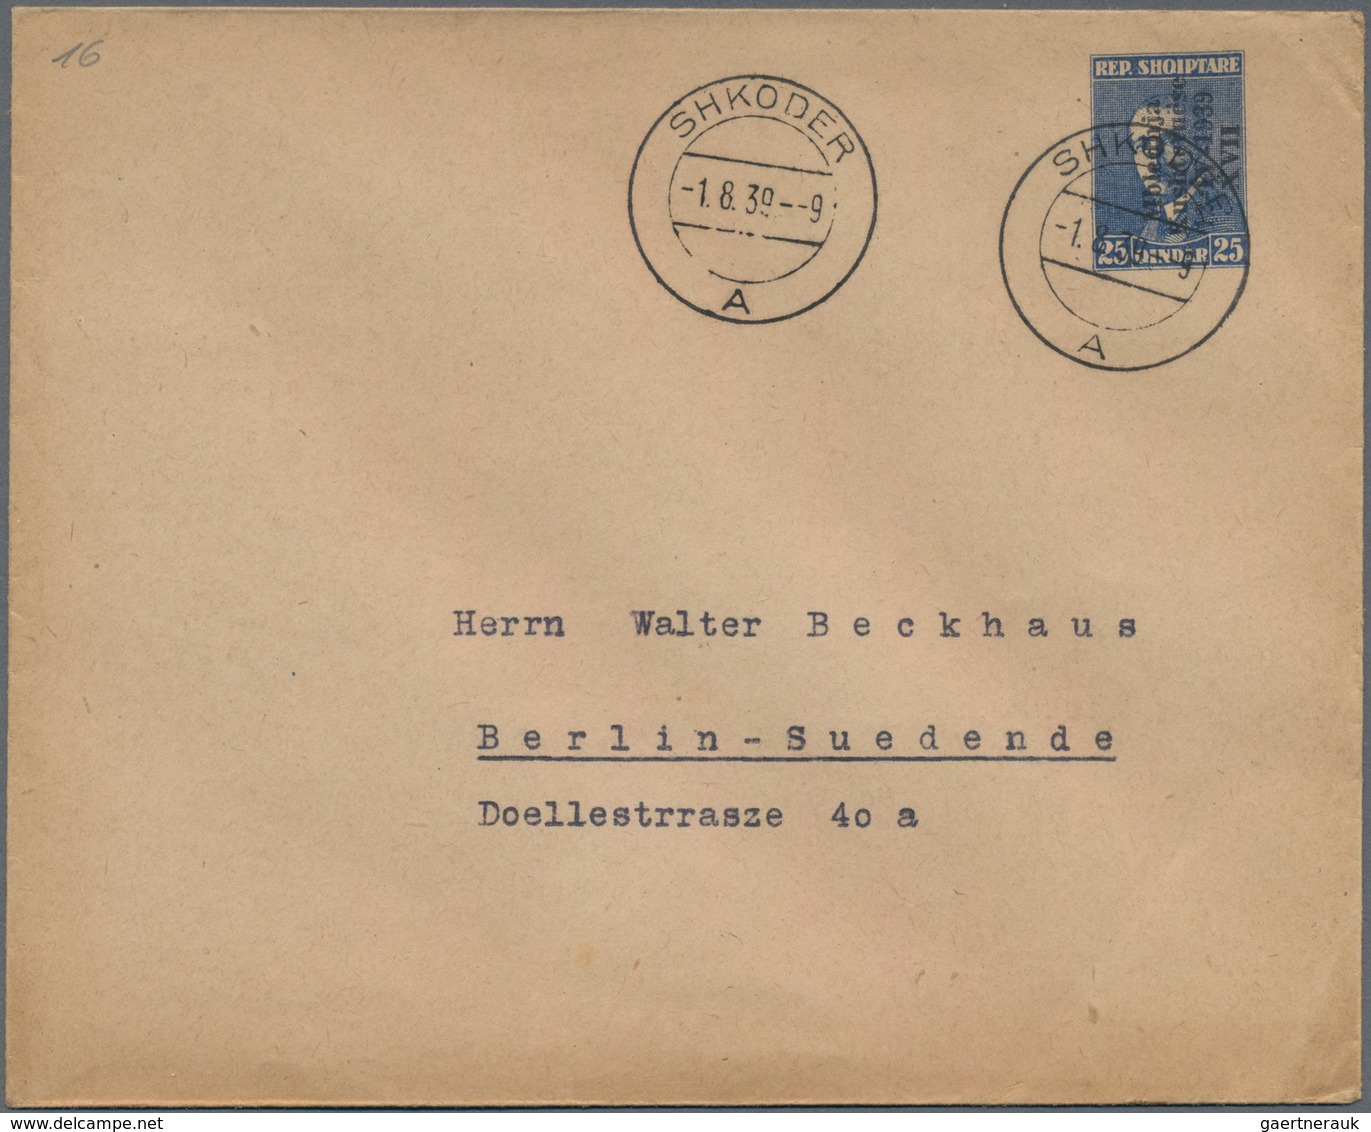 Albanien - Ganzsachen: 1939, 25 Q Blue Postal Stationery Cover With Overprint Cancelled "SHKODER" To - Albania